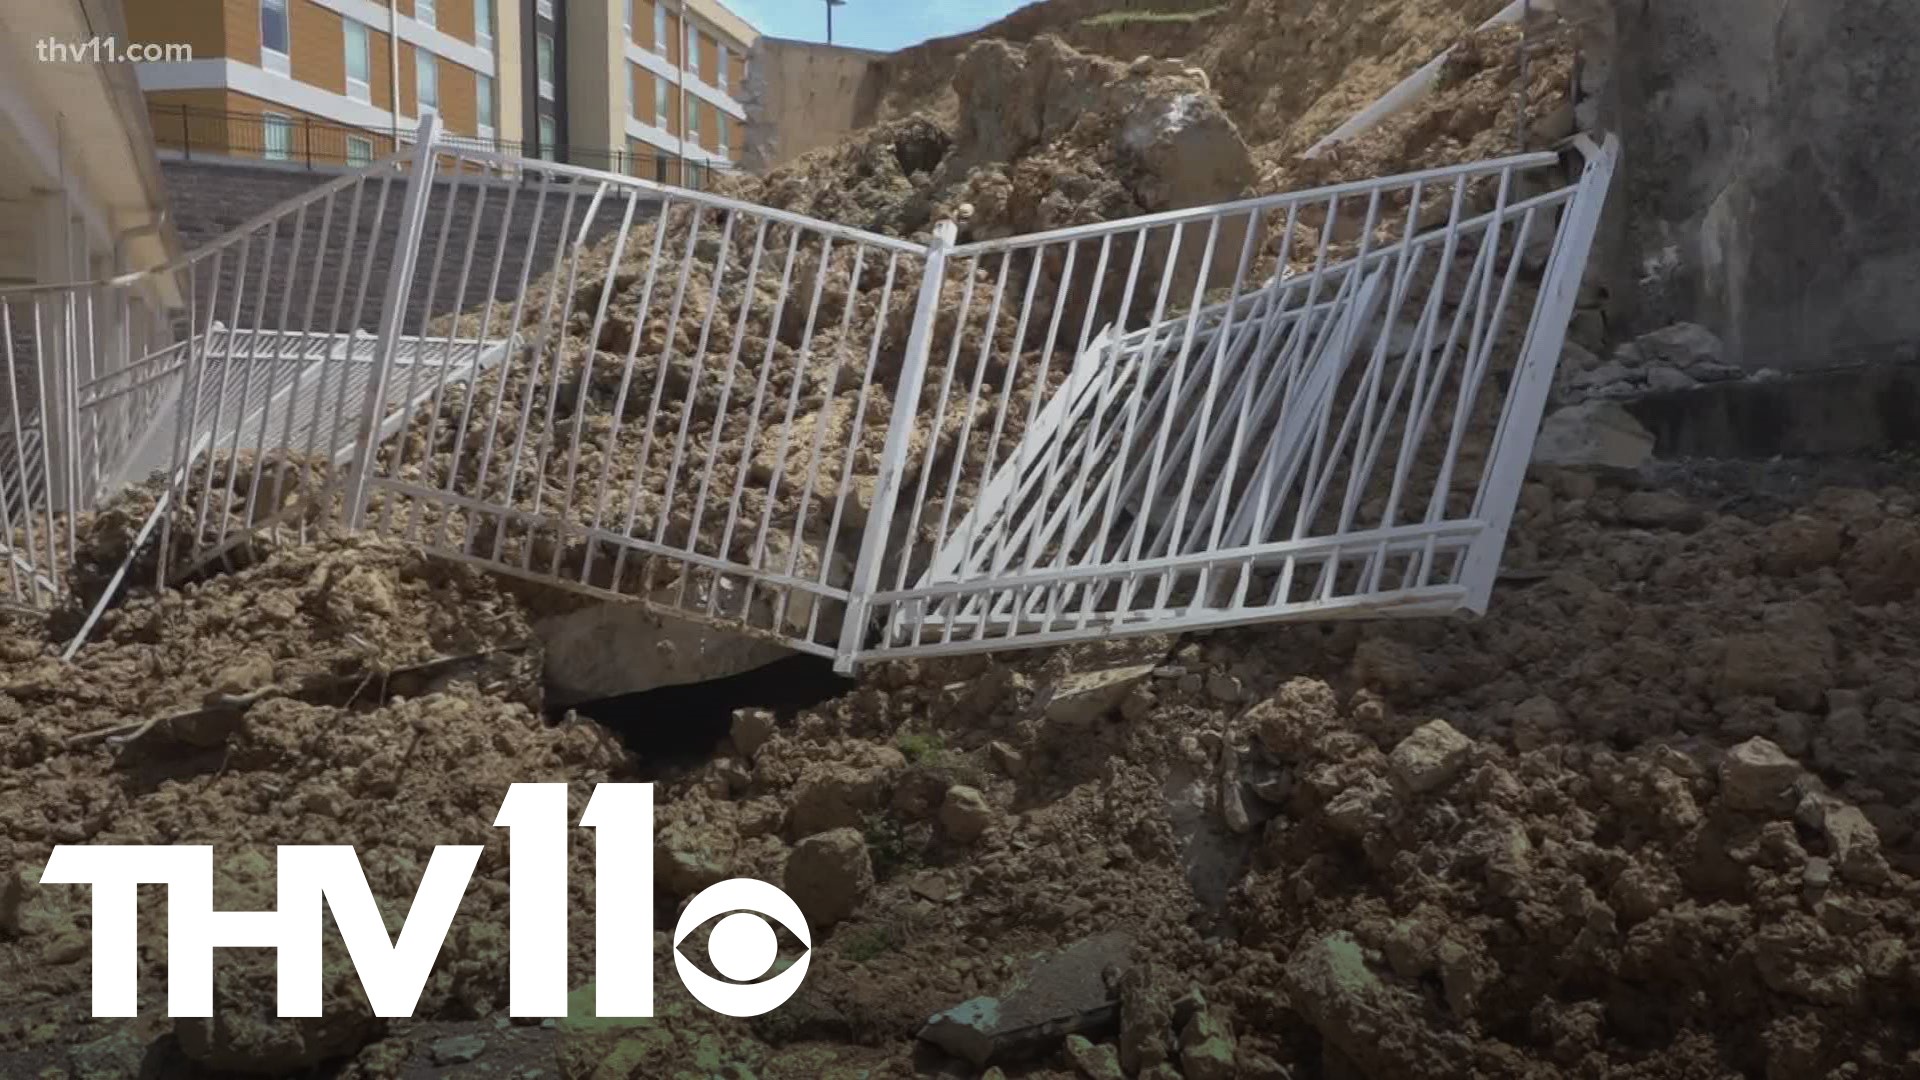 A landslide at the condominiums near Catalina Circle in Hot Springs is being evaluated by an insurance agency and a geologist.